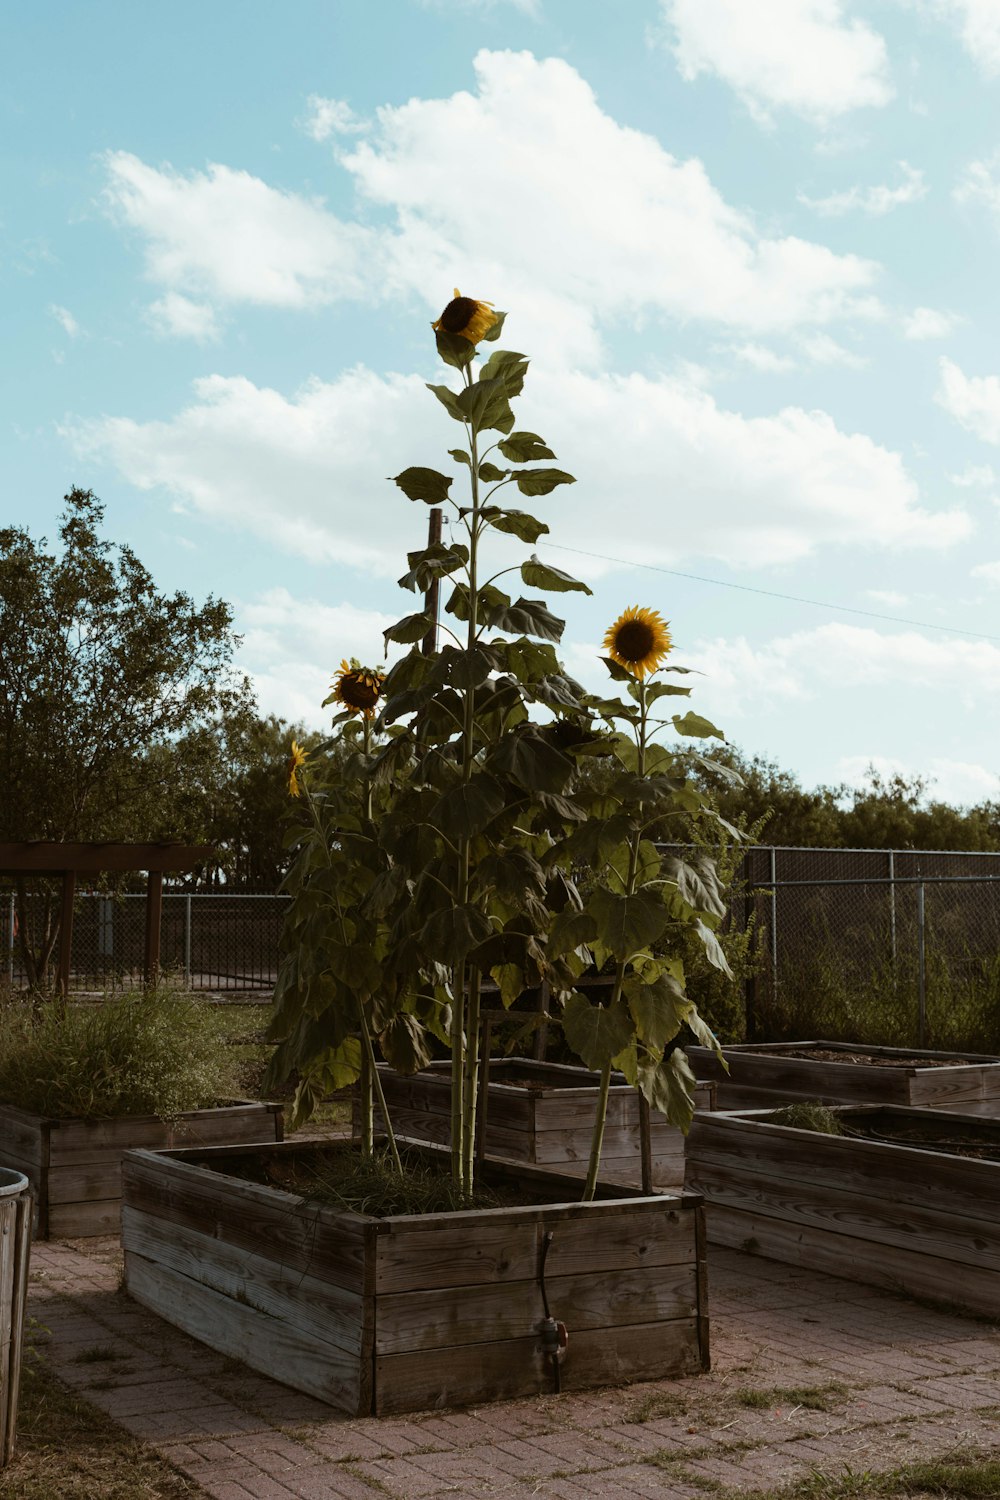 a sunflower is growing in a wooden planter